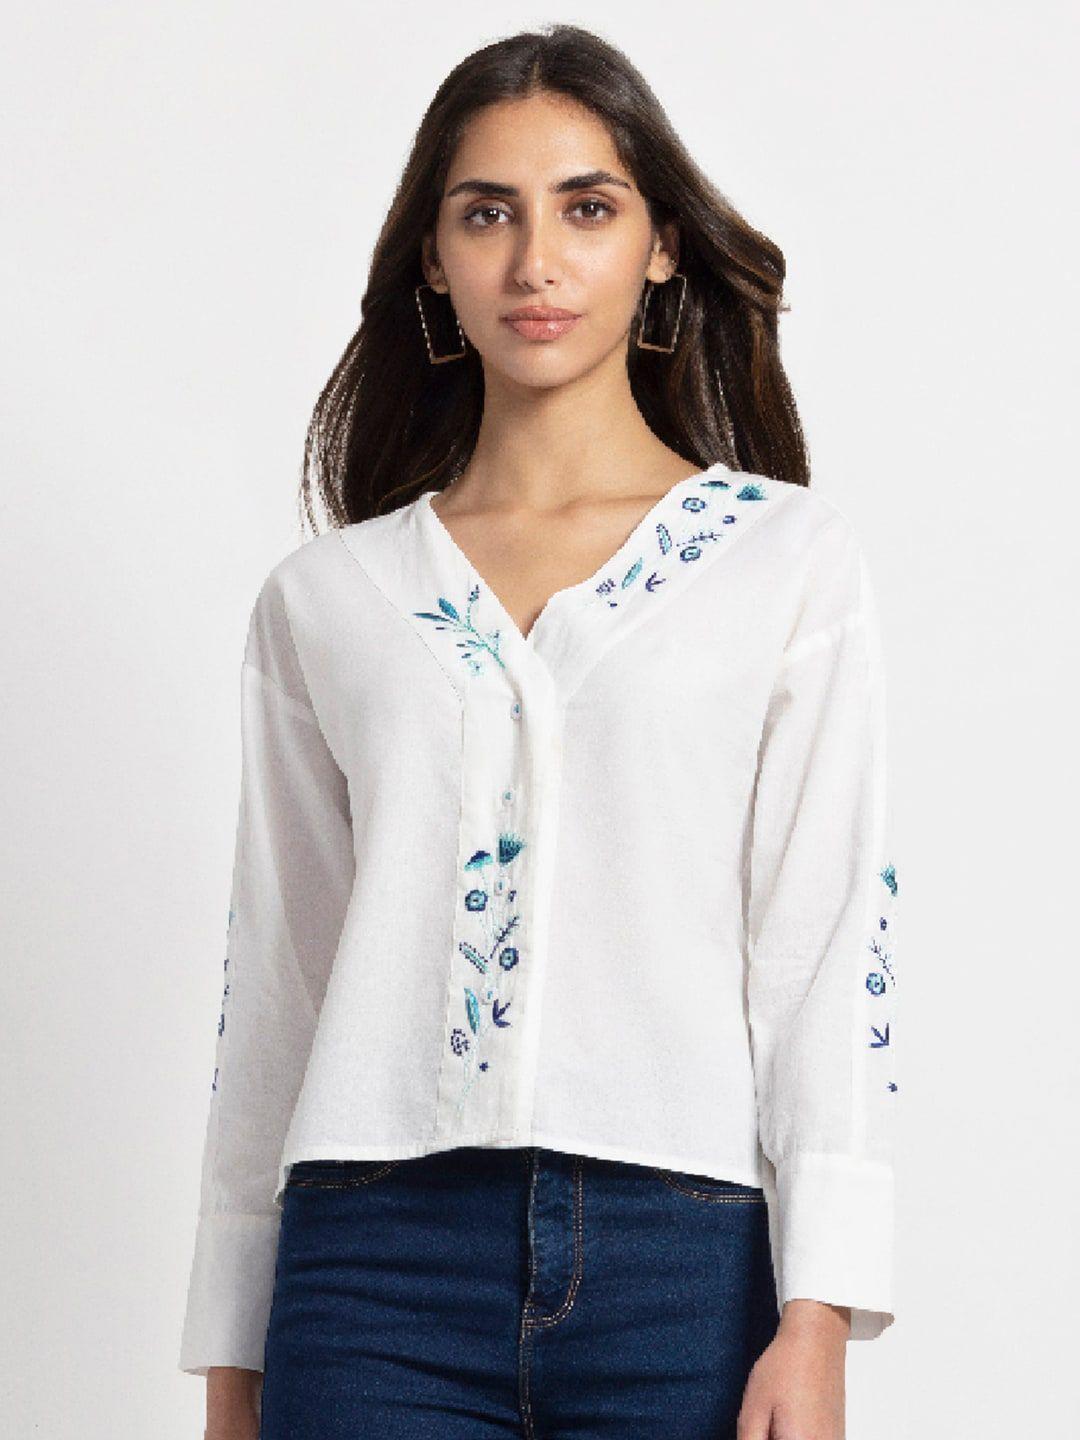 shaye v-neck long cuffed sleeves floral embroidered cotton top